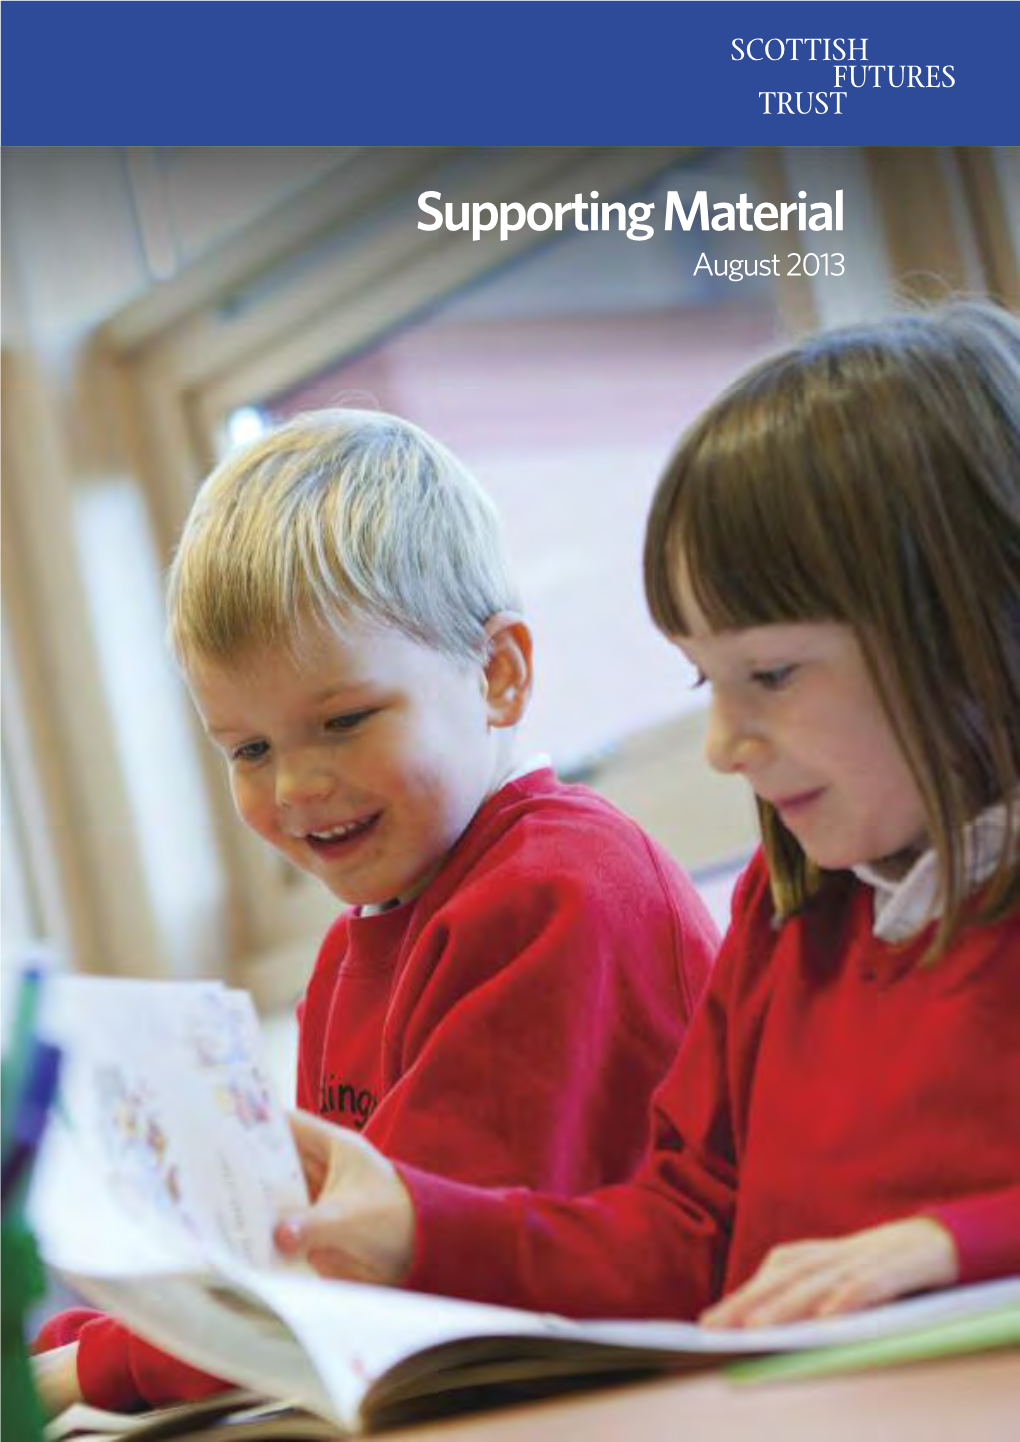 Supportingmaterial August2013 SCOTTISH FUTURES TRUST SUPPORTING MATERIAL